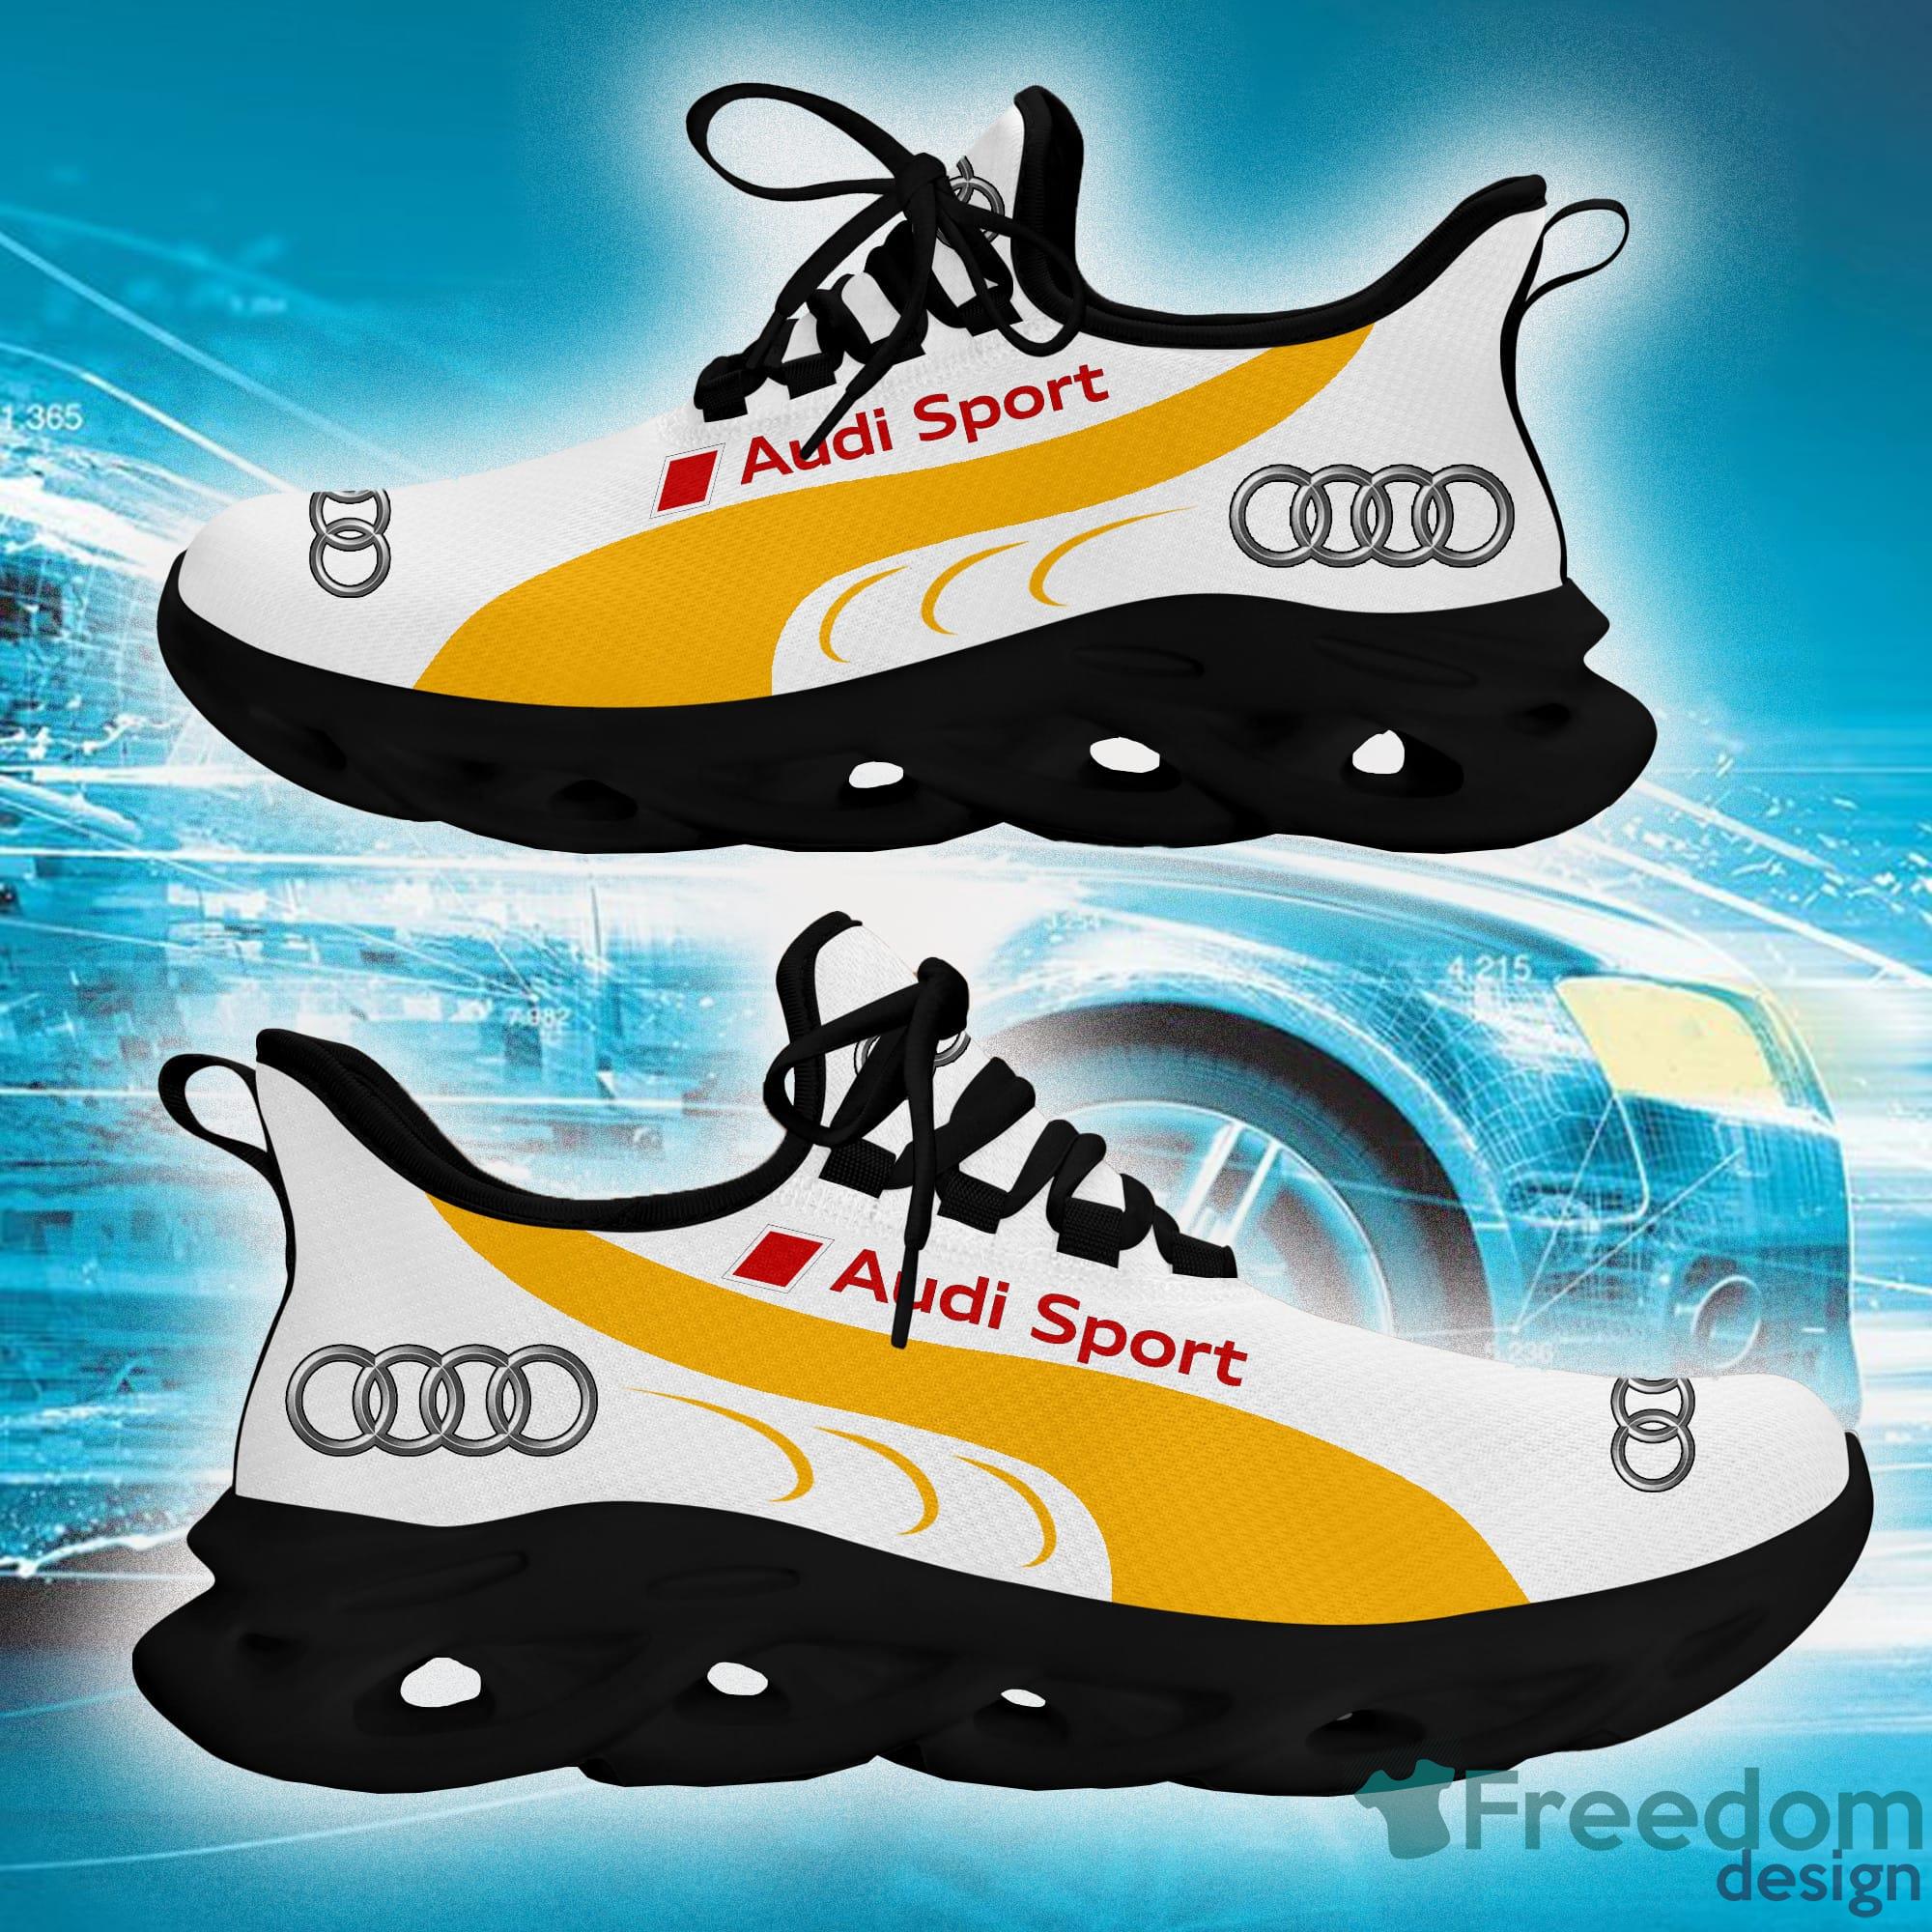 Audi Sport Running Shoes Attitude Love Car Max Soul Sneakers Fans